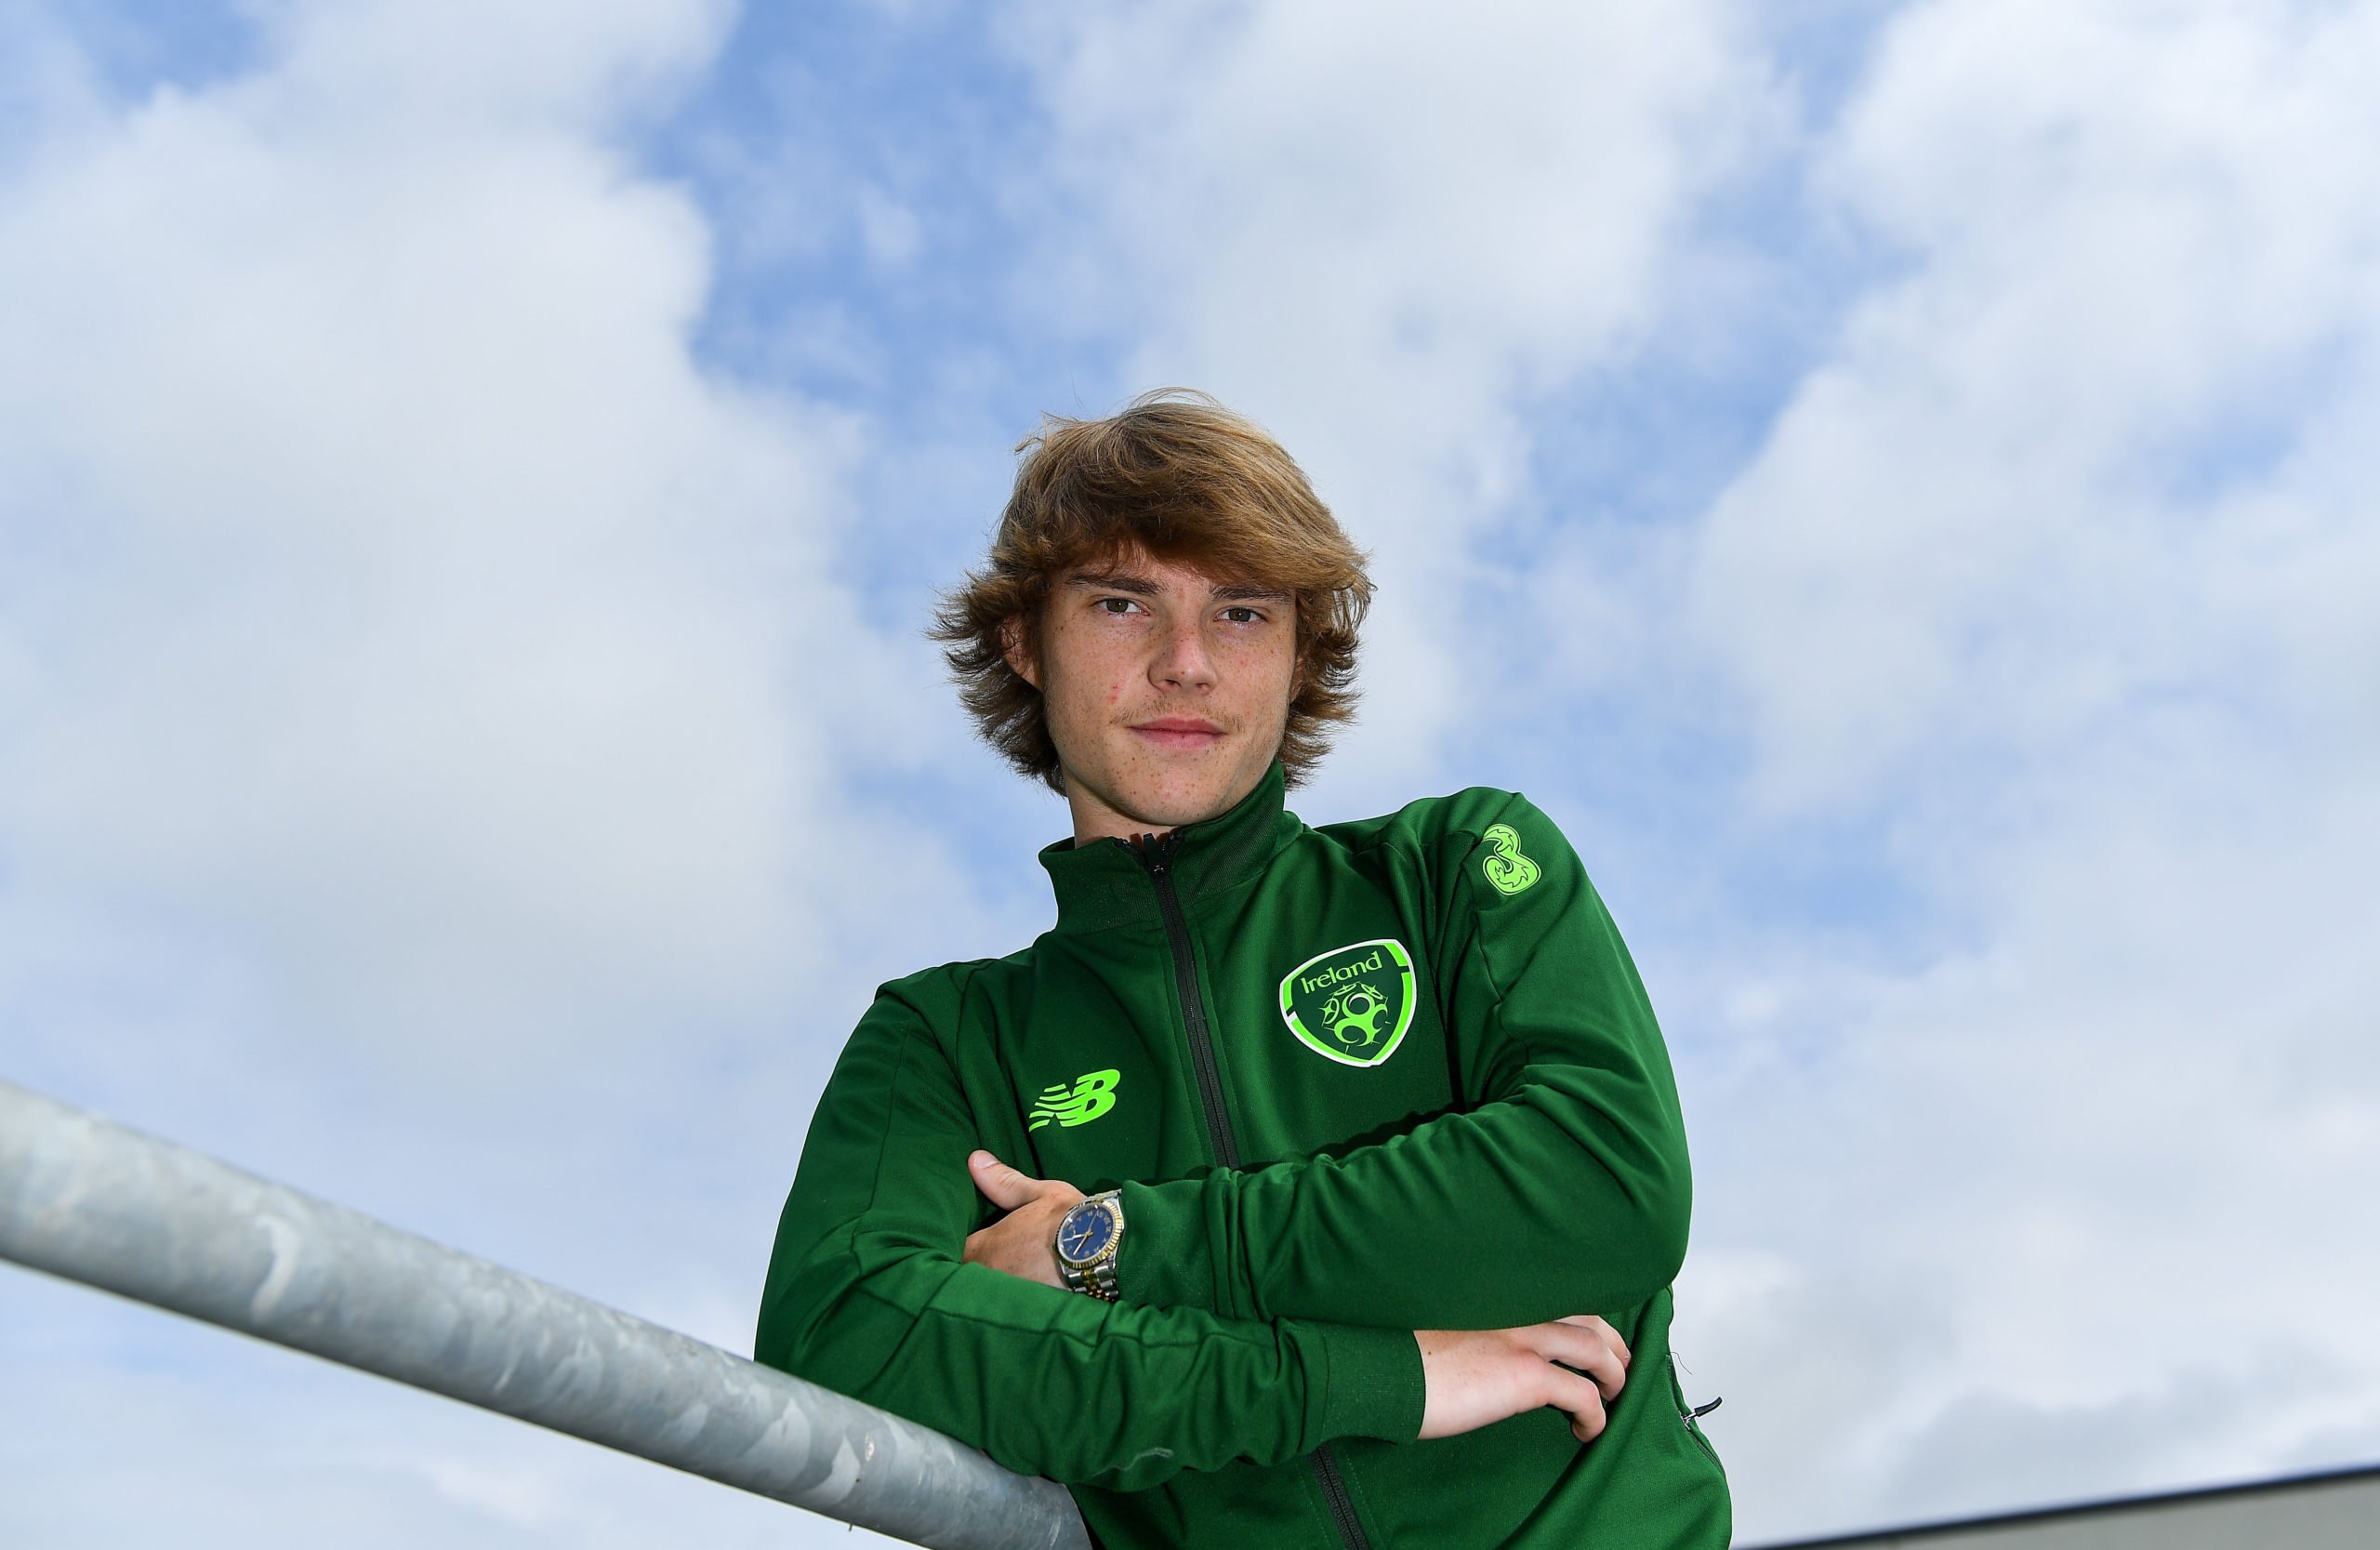 Celtic youngster Luca Connell helps SPFL side to promotion